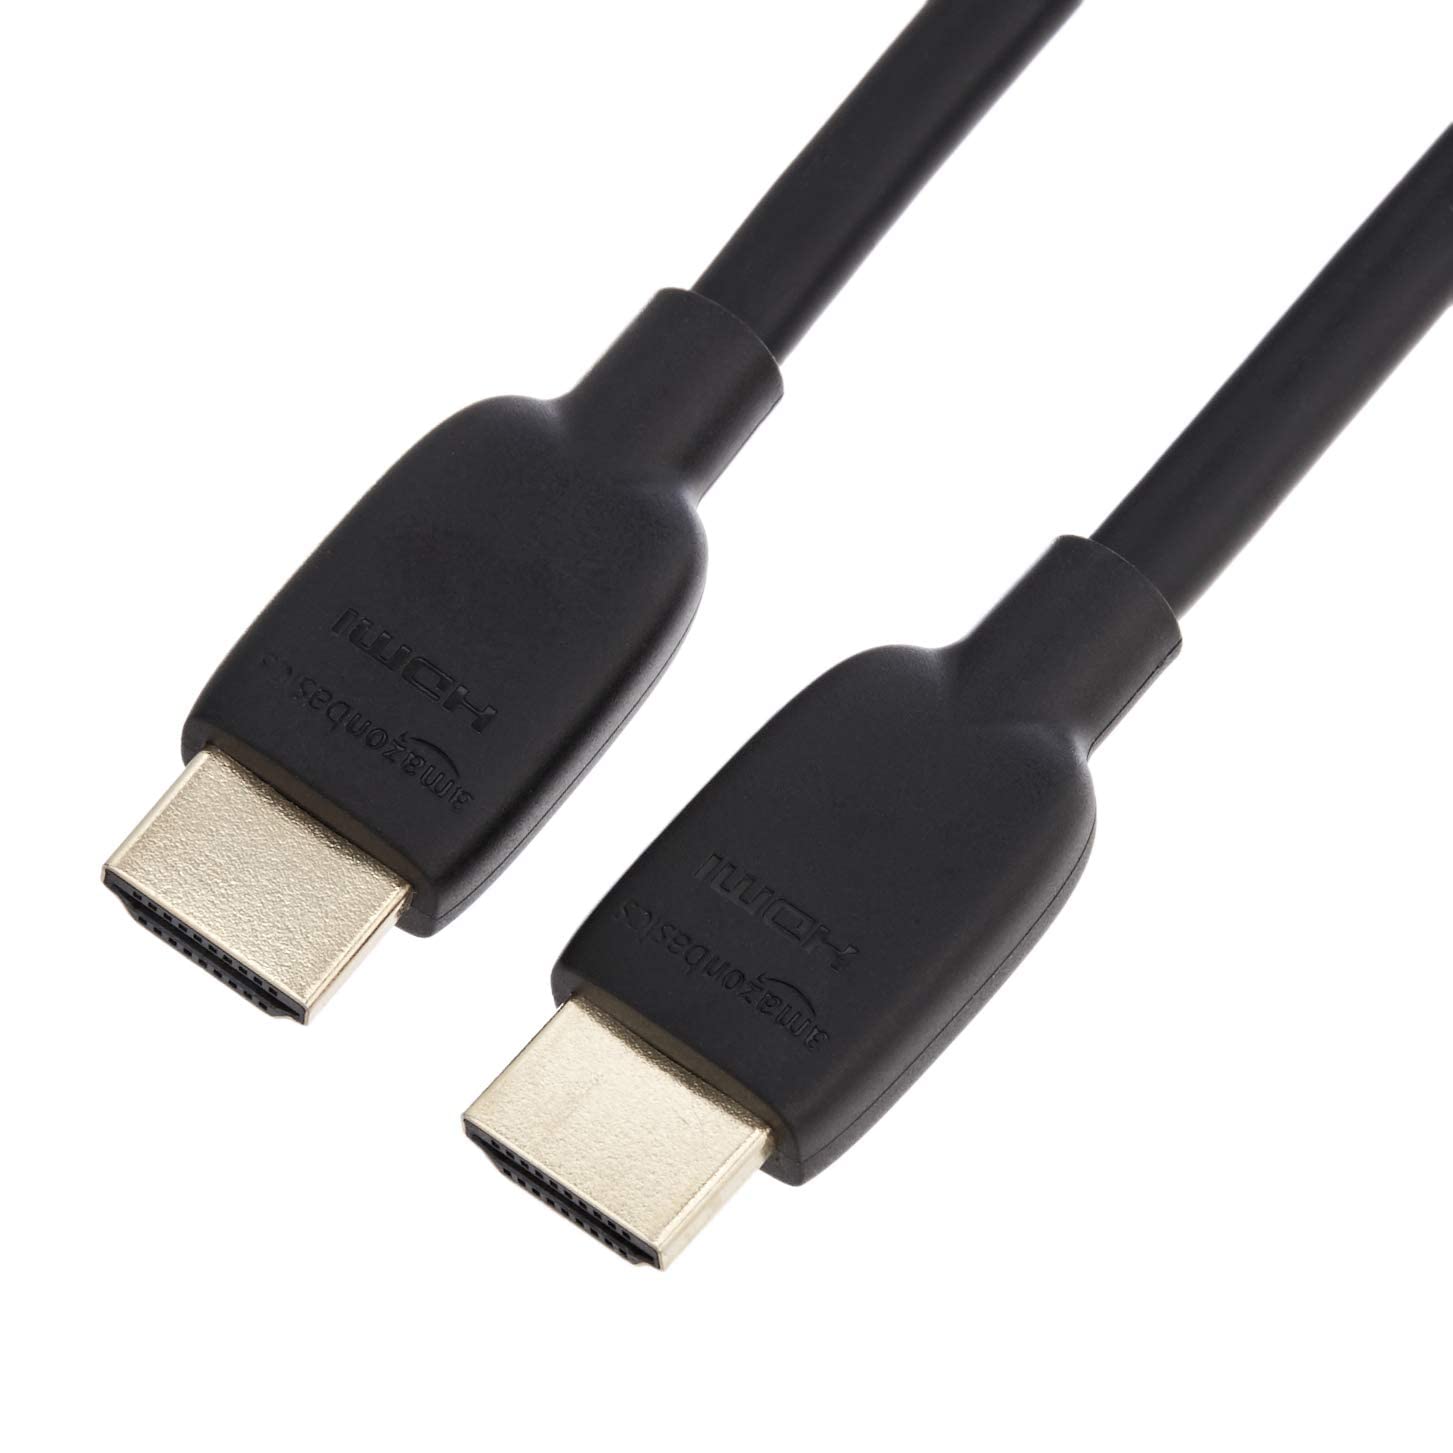 hdmi 10 ft 48gps cable : Electronics $5.64 at Amazon